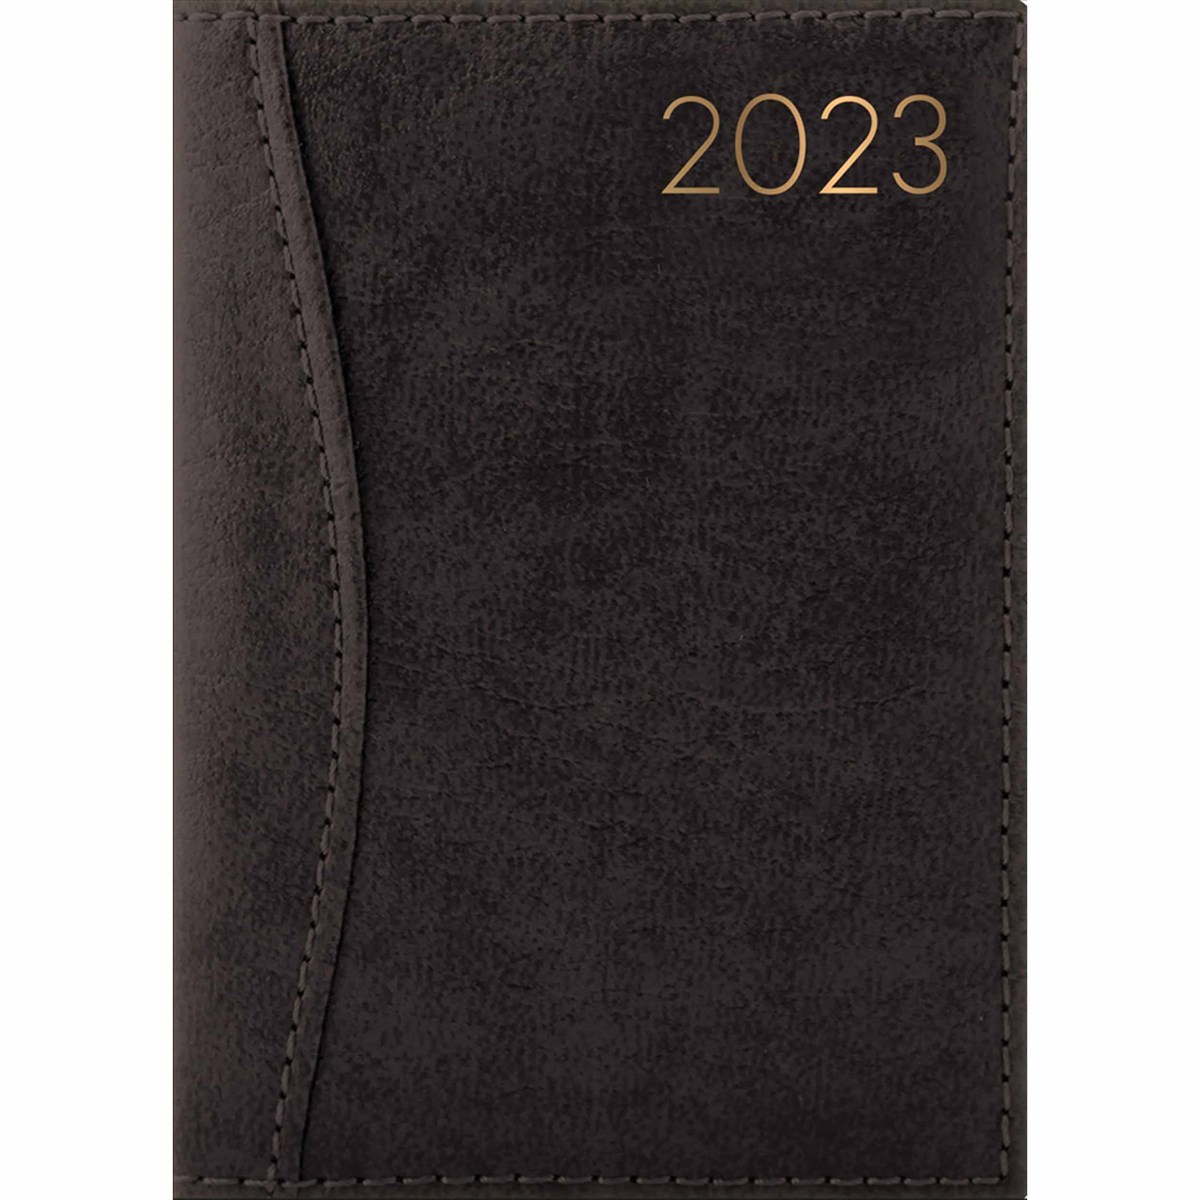 Black Textured Leatherette A5 Diary...